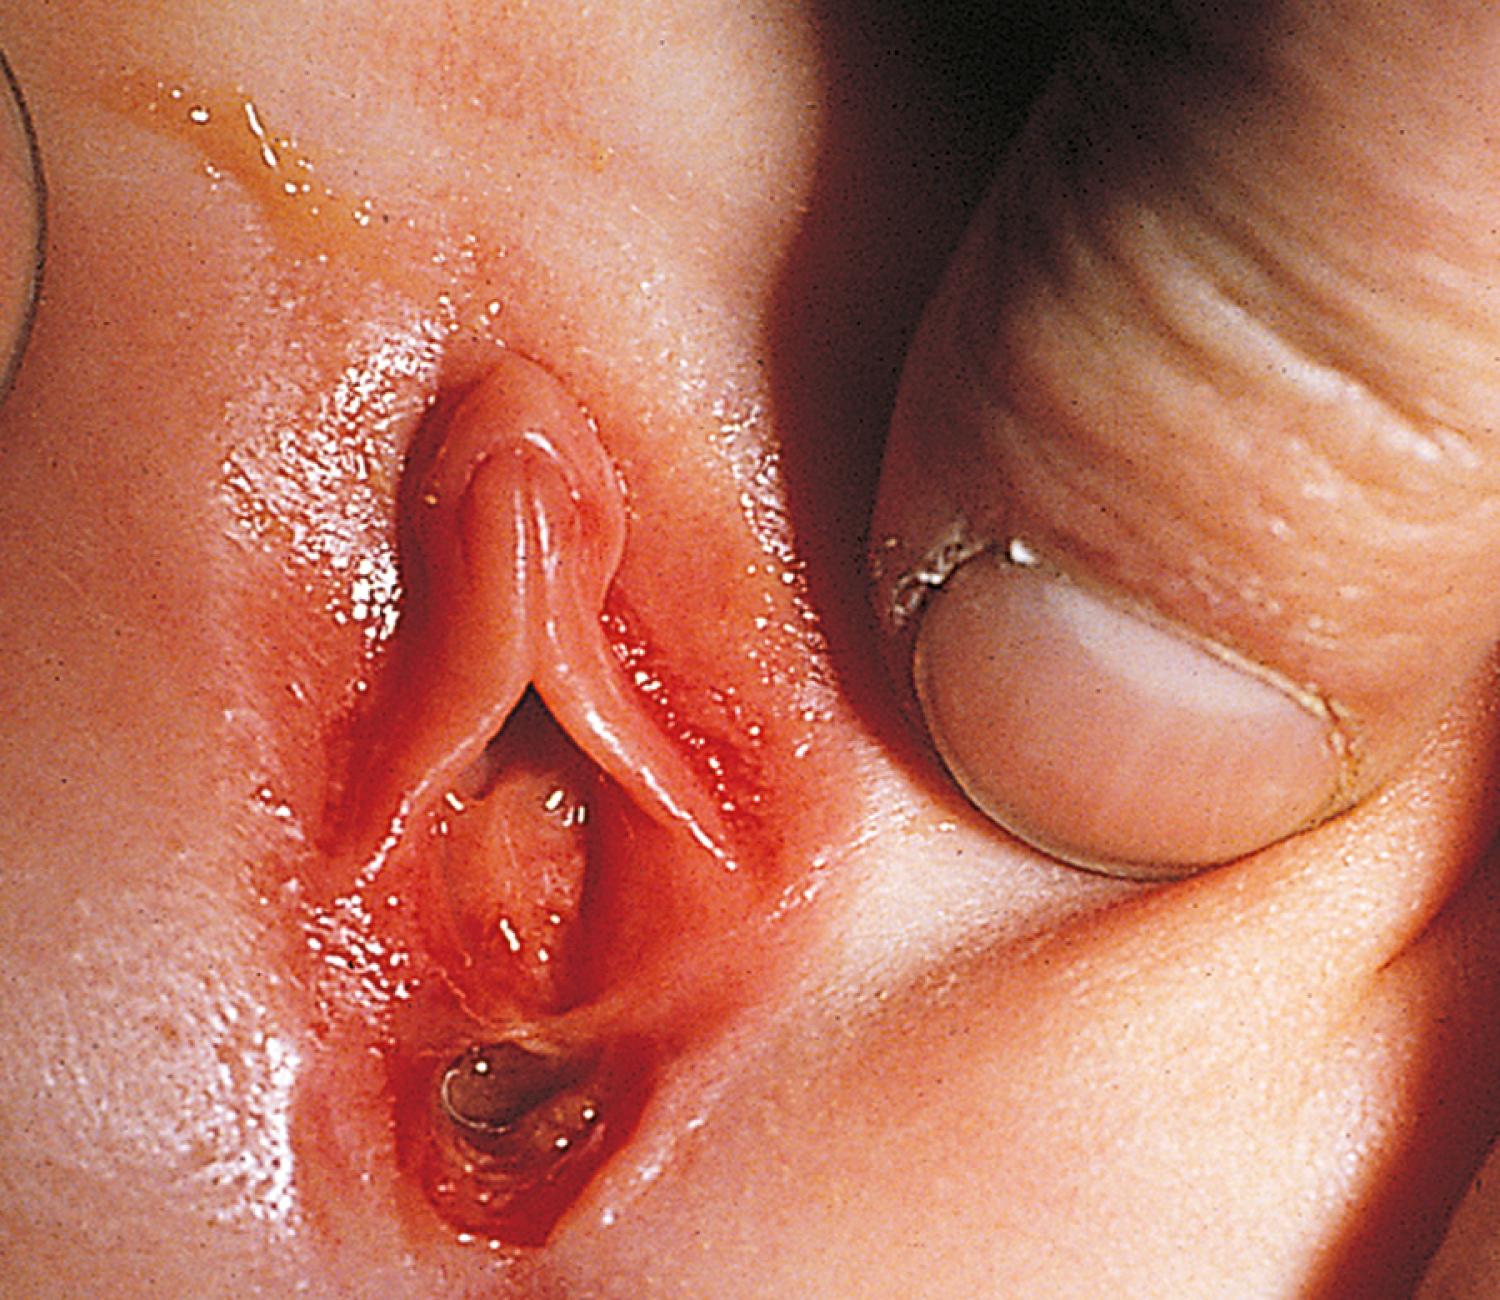 Fig. 19.15, Superficial penetrating injury. This infant had a chief complaint of blood spotting on the diaper. Inspection revealed a perineal tear just posterior to the hymenal ring. There was no evidence of internal extension on vaginoscopy under anesthesia. Sexual abuse was suspected.